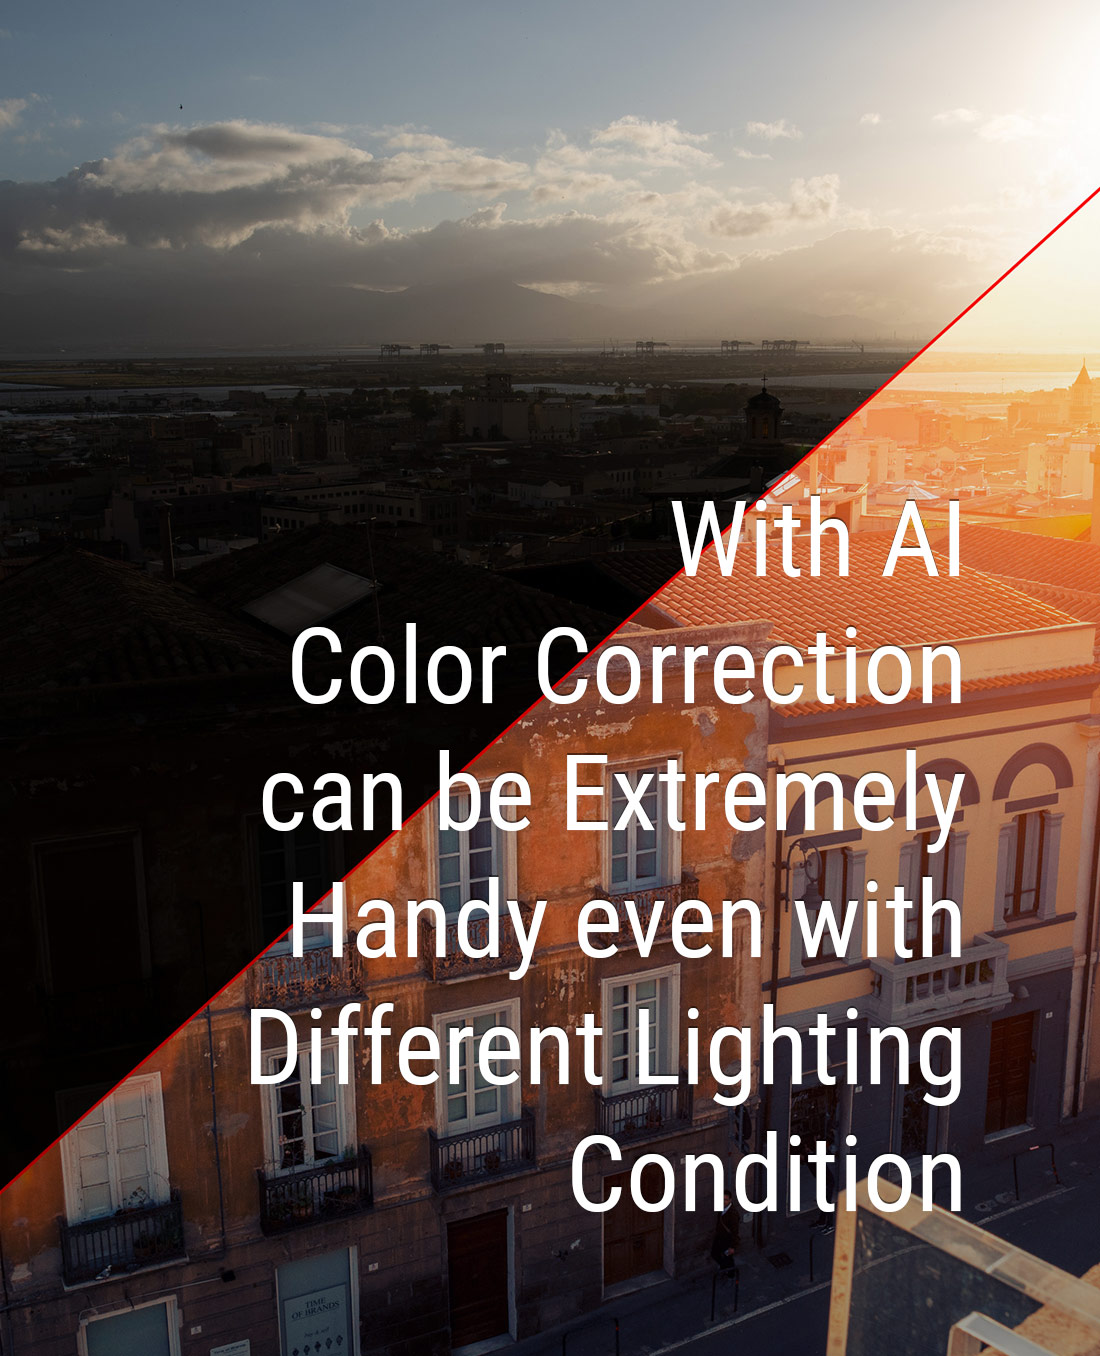 With AI Color Correction can be Extremely Handy even with Different Lighting Conditions